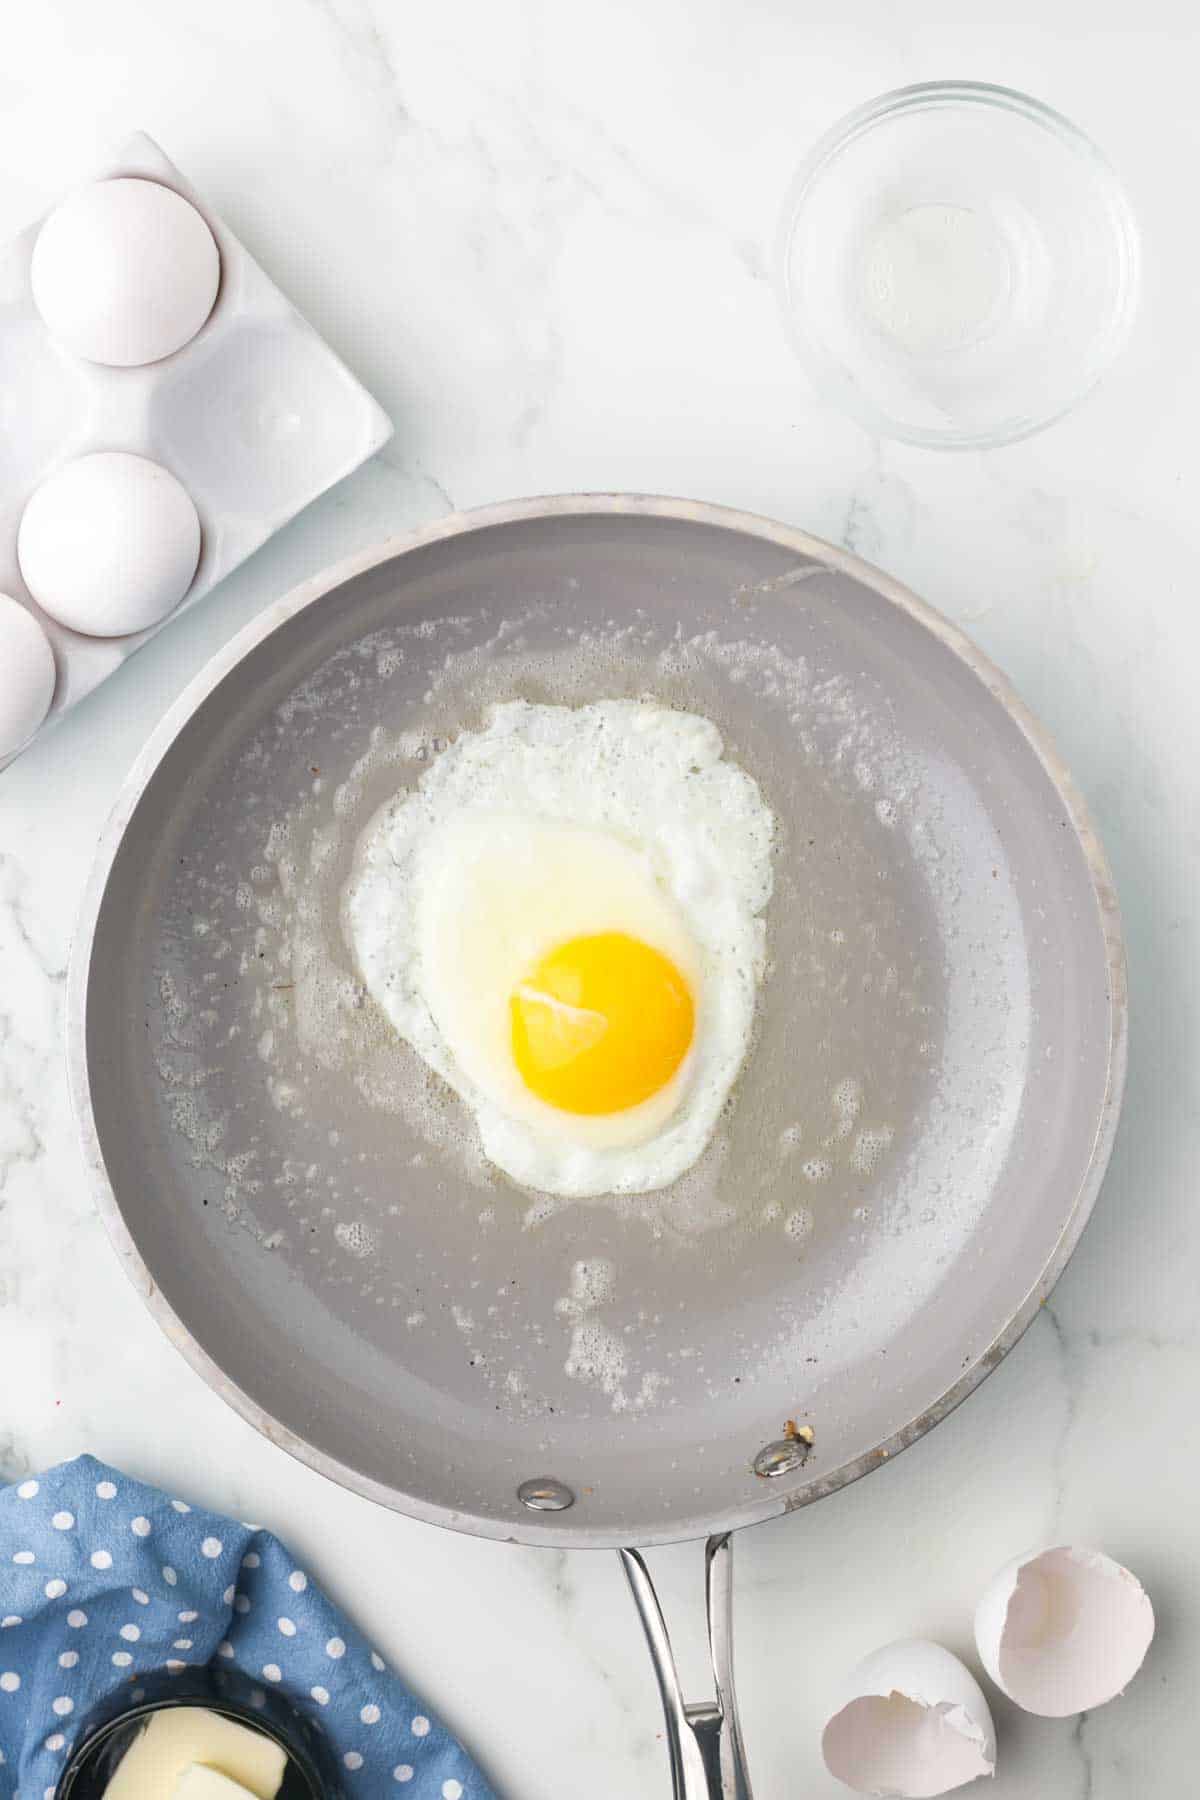 sautéed pan with an over easy egg cooking in it